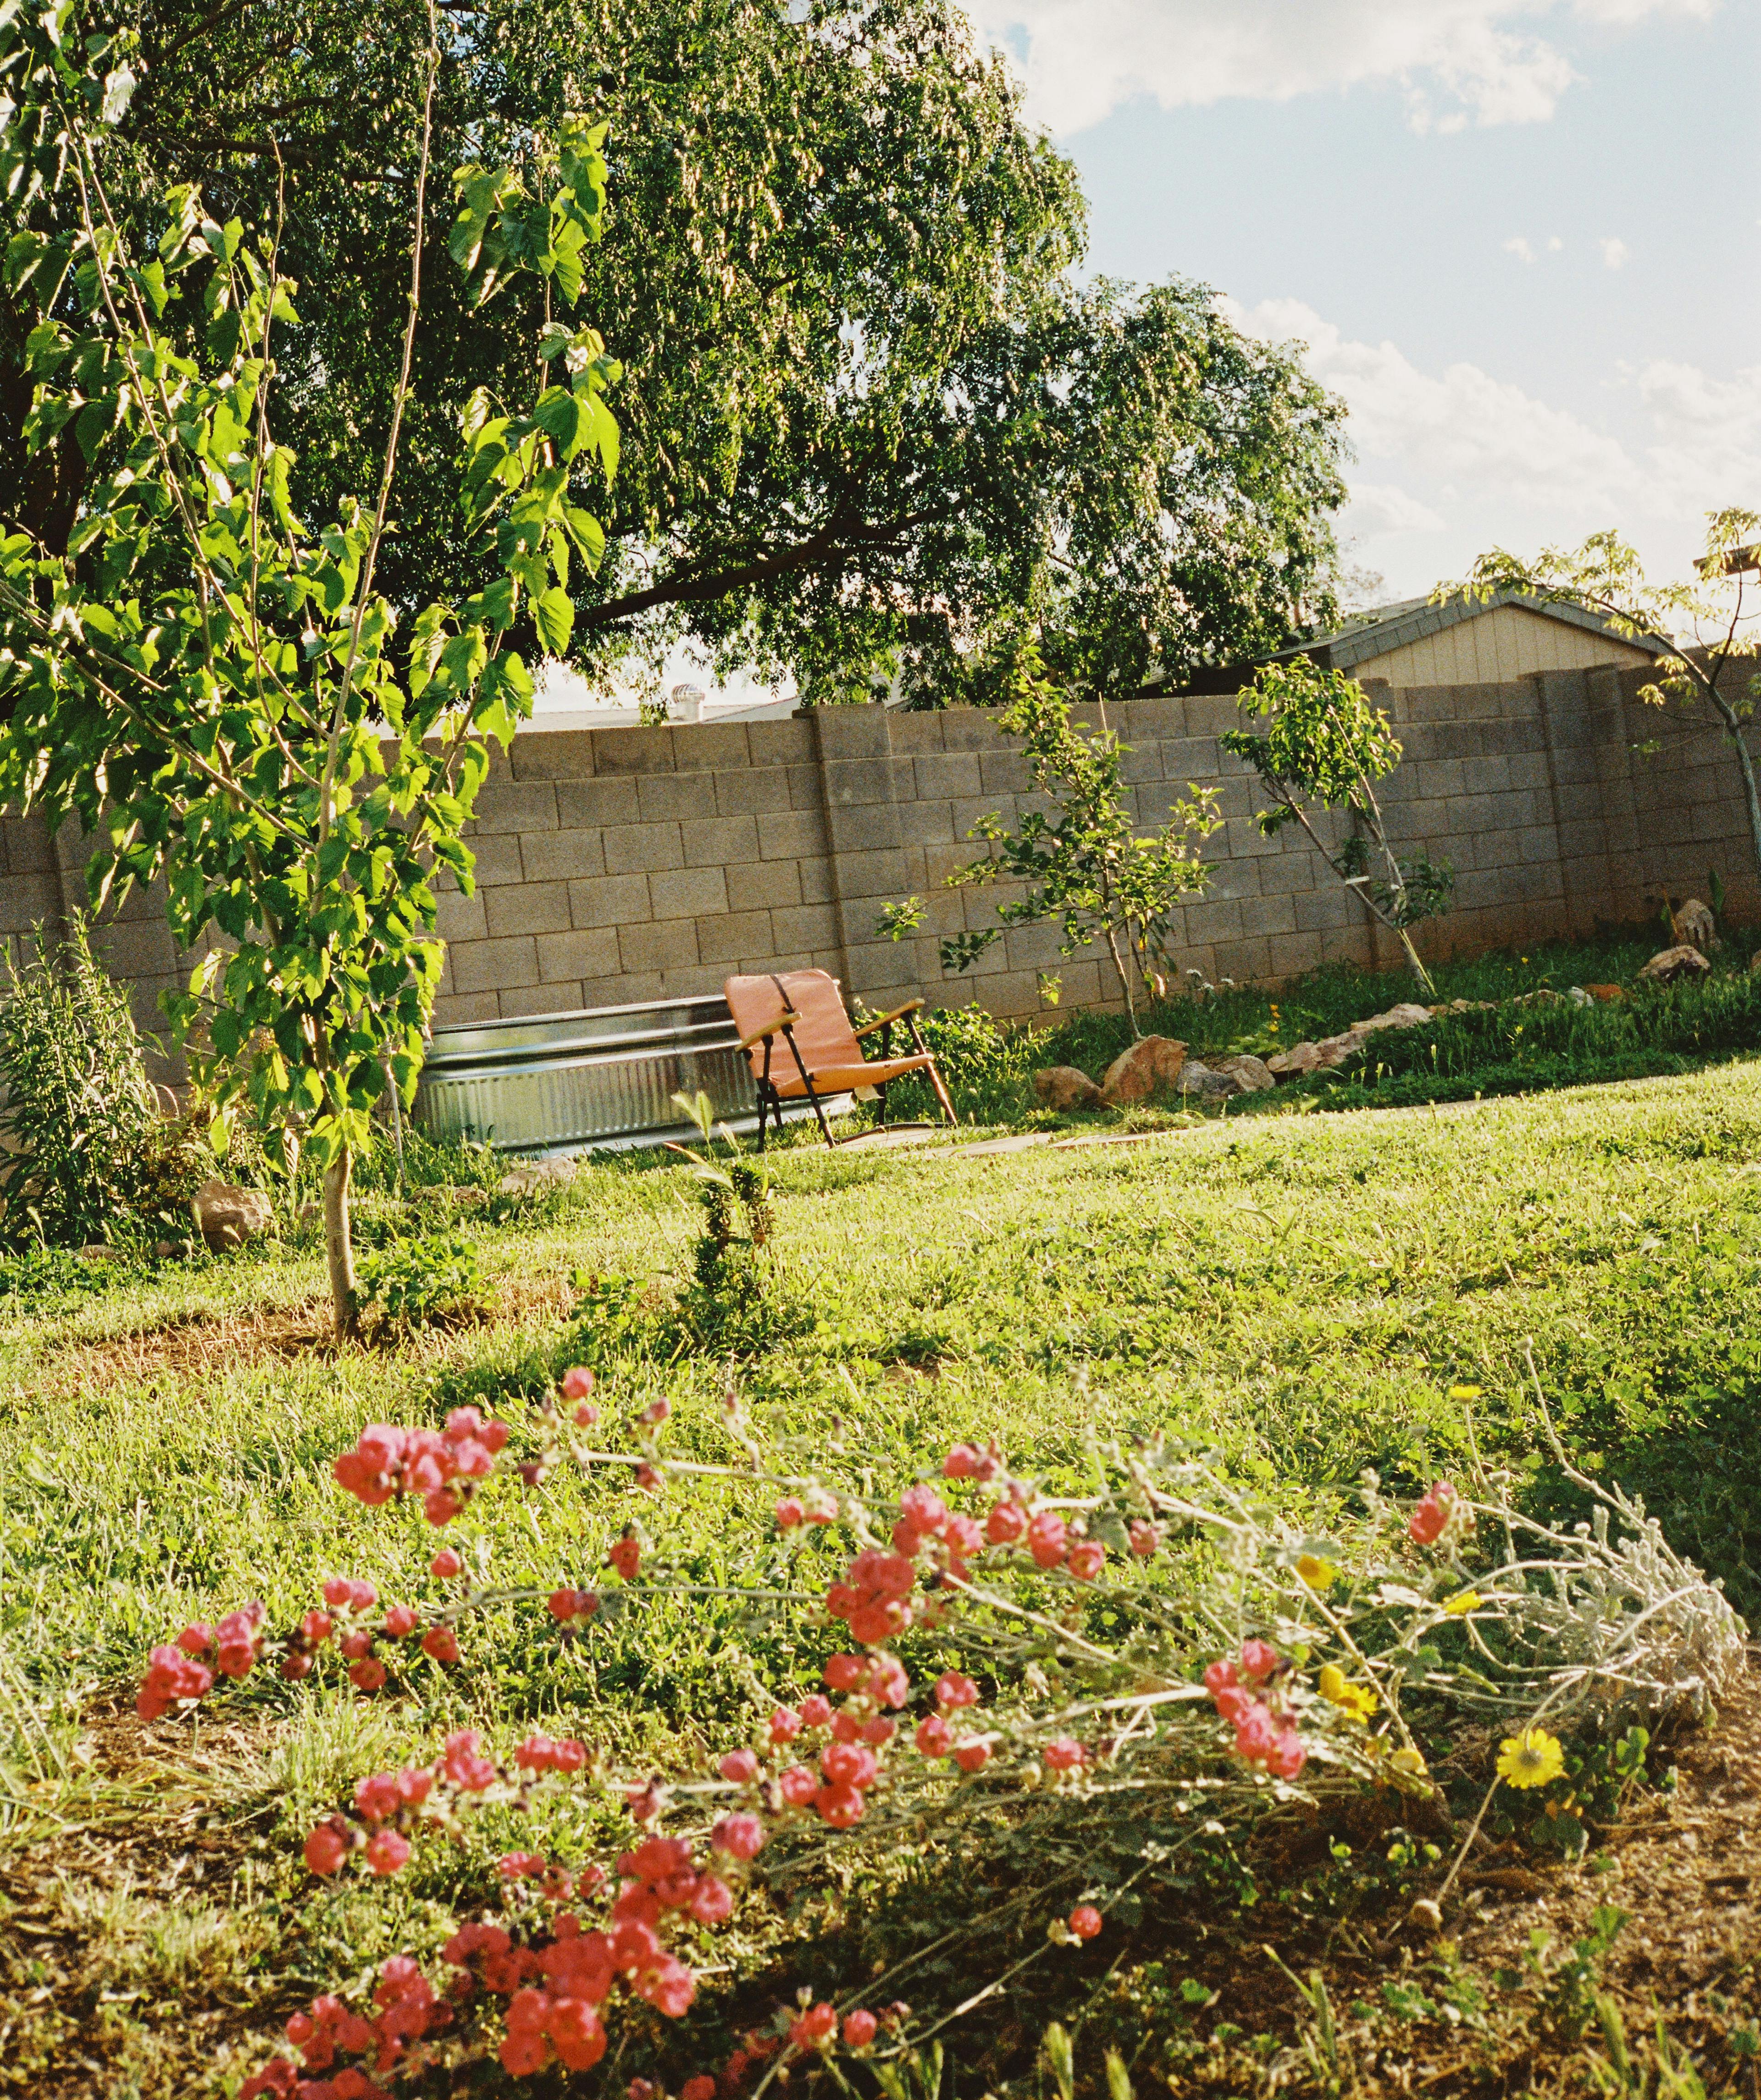 Backyard garden with trees and flowers on film by photographer, Natalie Carrasco for Moment.